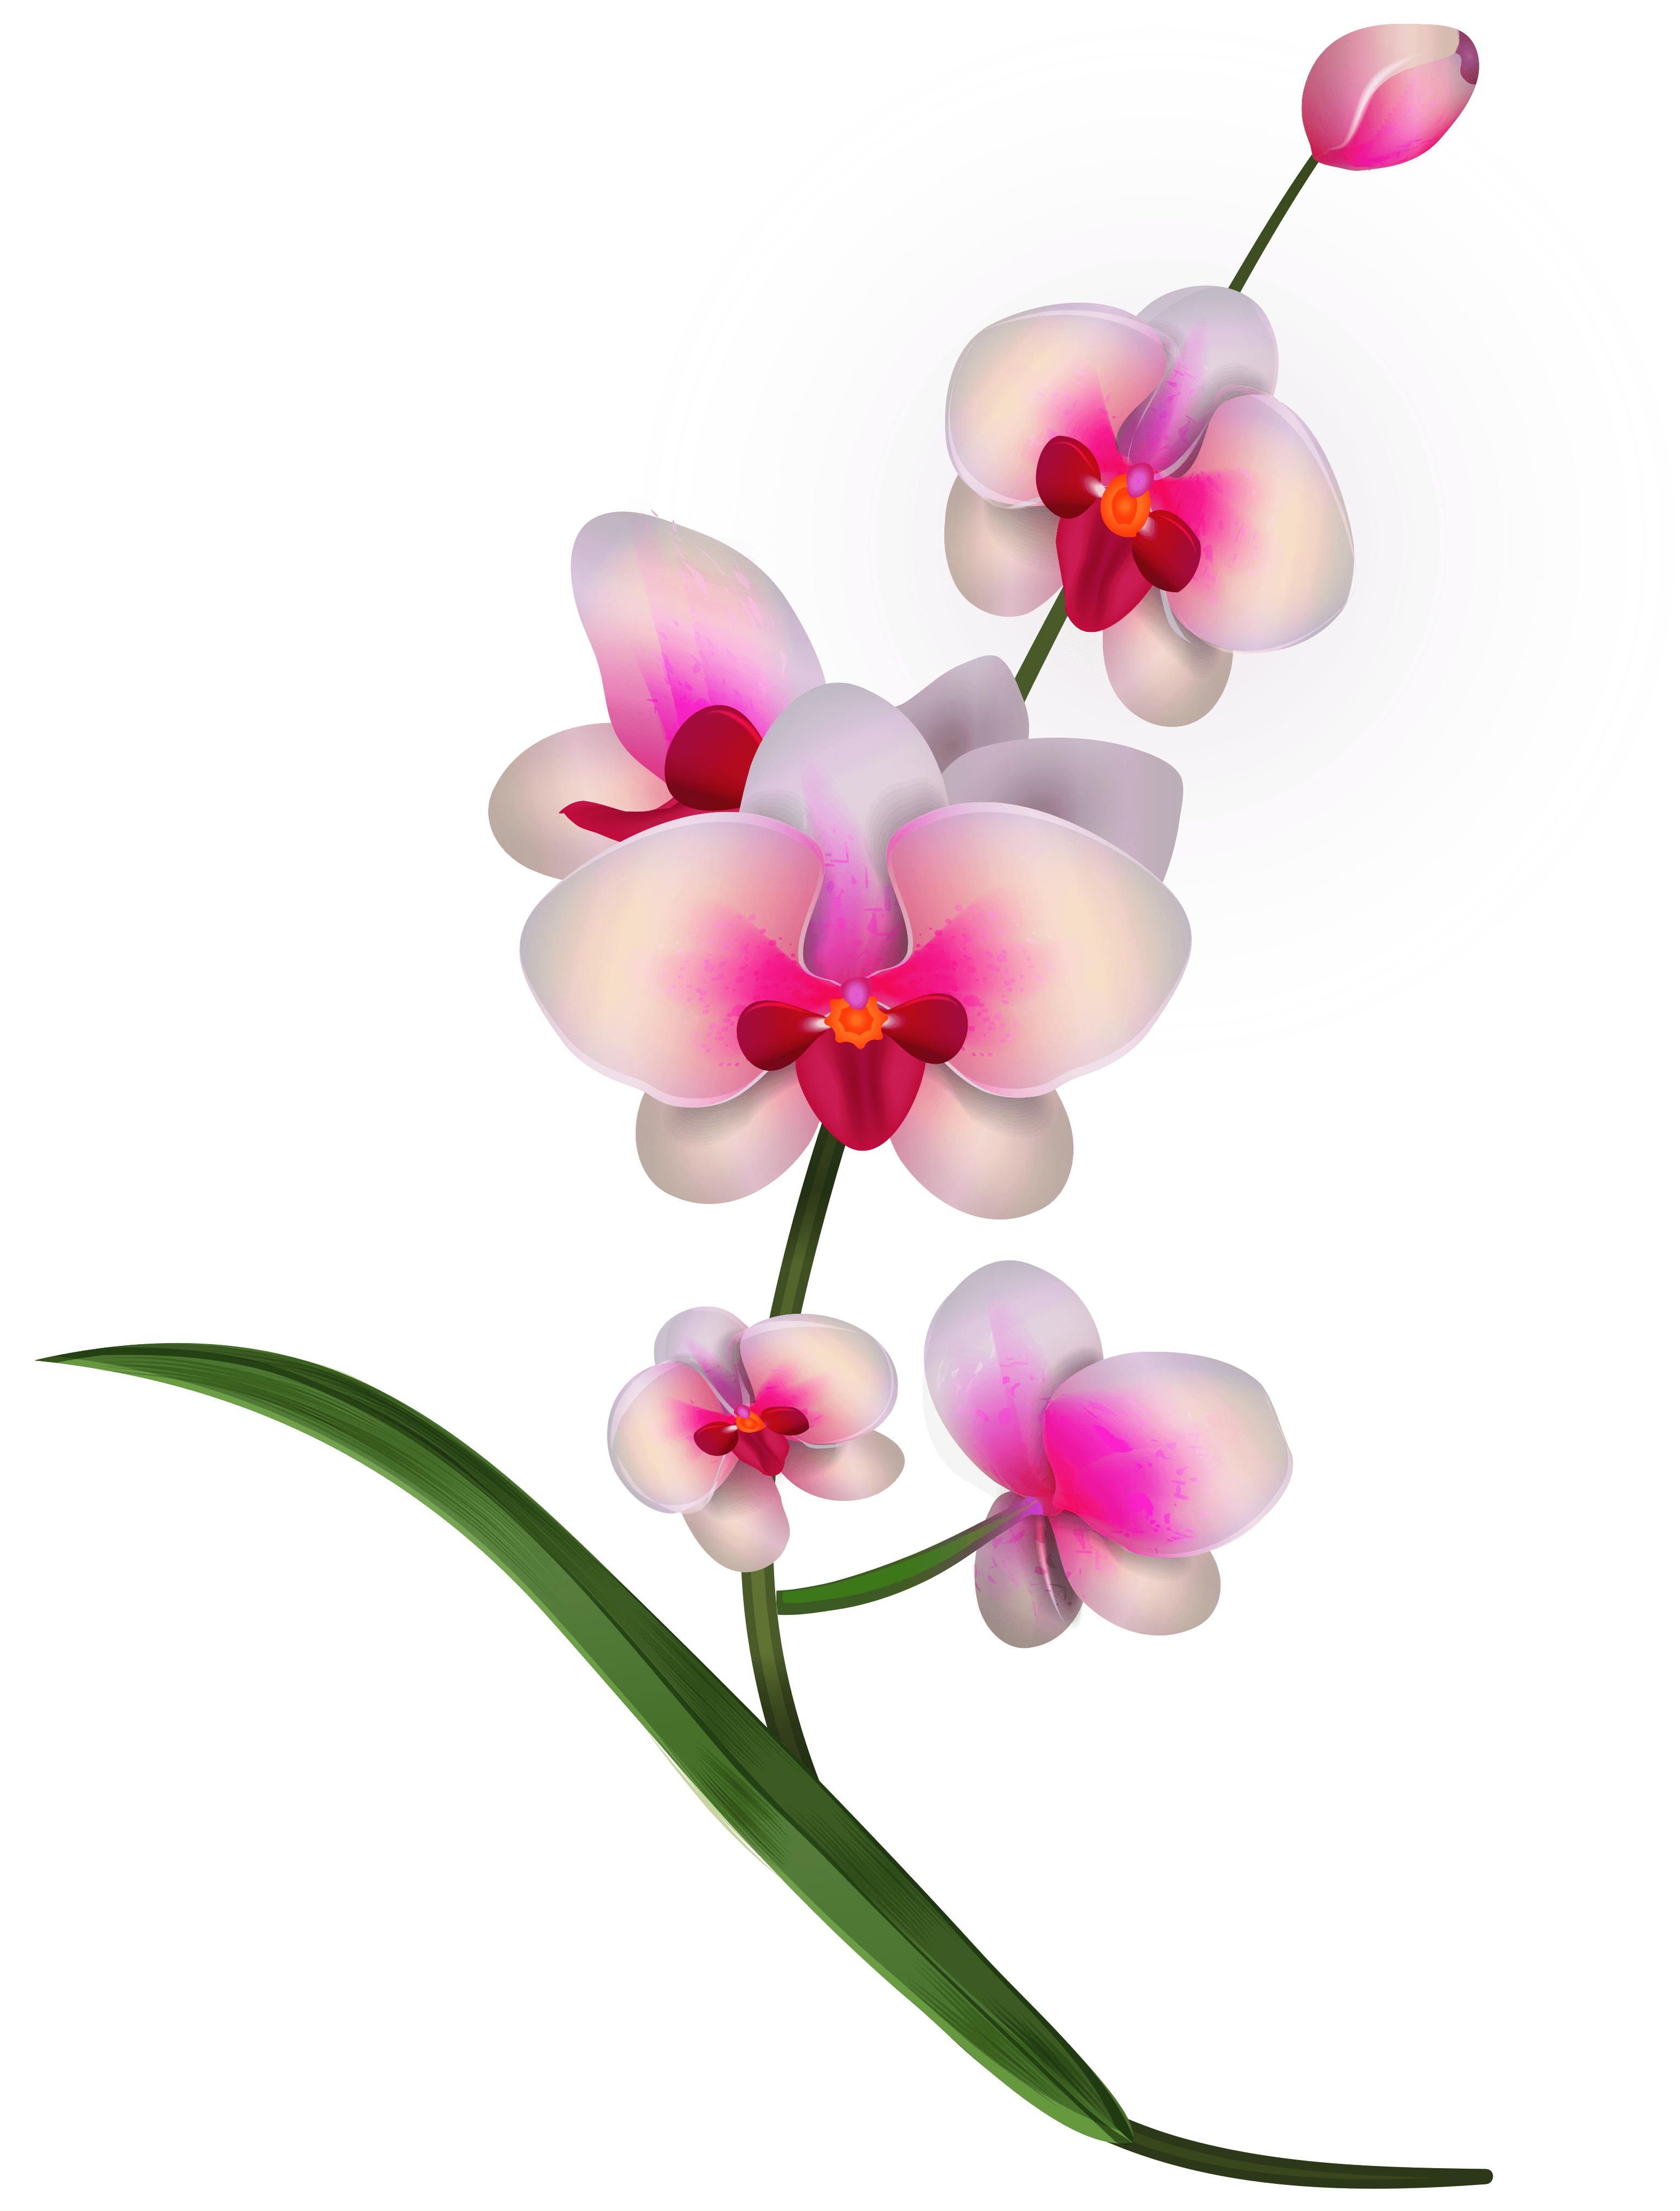 Orchid clipart stylised. Collection of free download